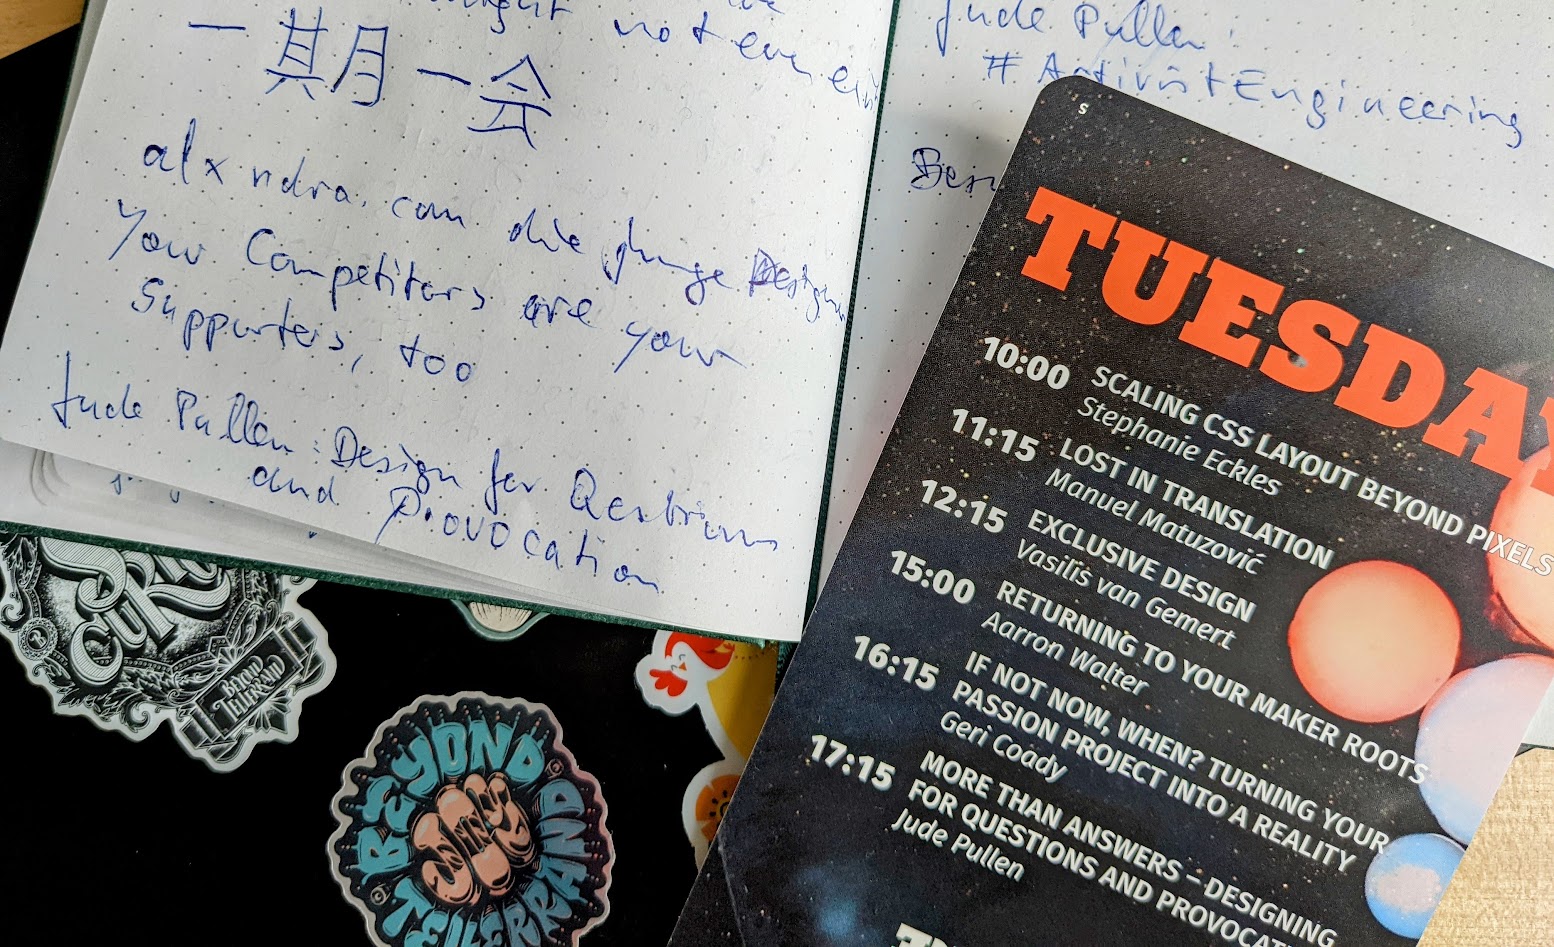 Sketchbook with notes in German and Japanese, laptop stickers by beyond tellerrand and stay curious, and the Tuesday schedule